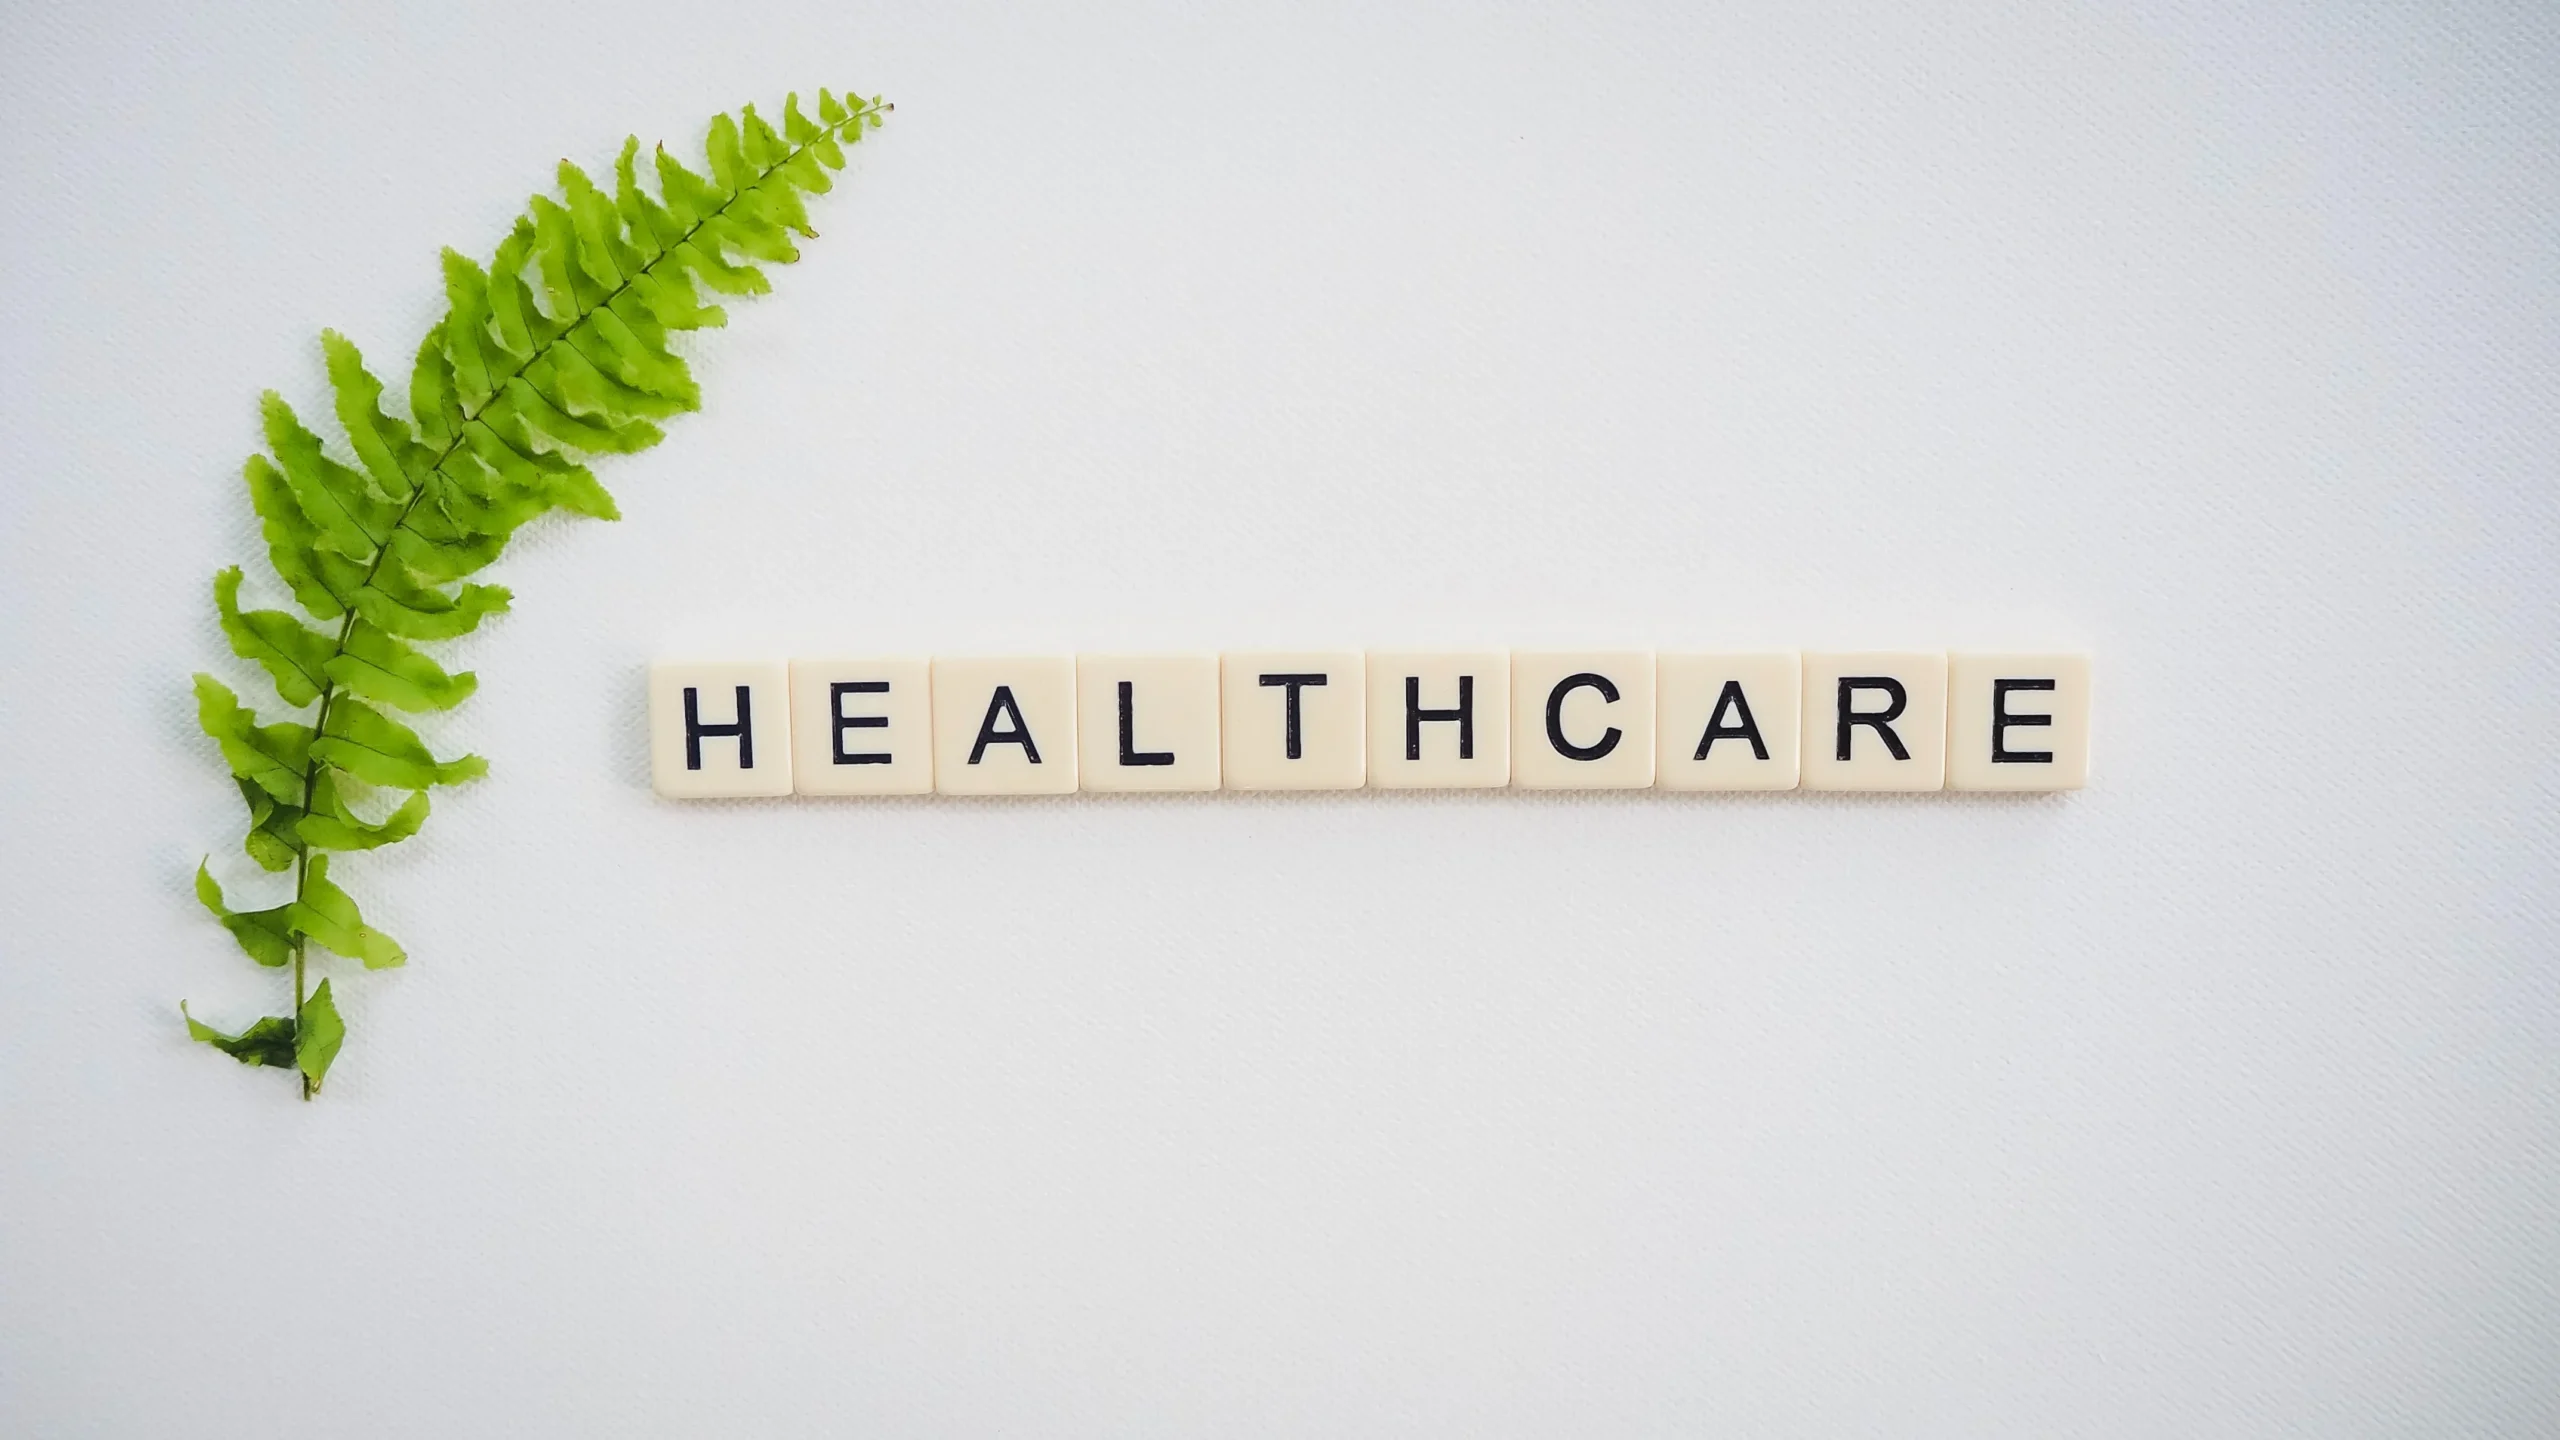 Scrabble letters spelling out healthcare with a leaf on a white background